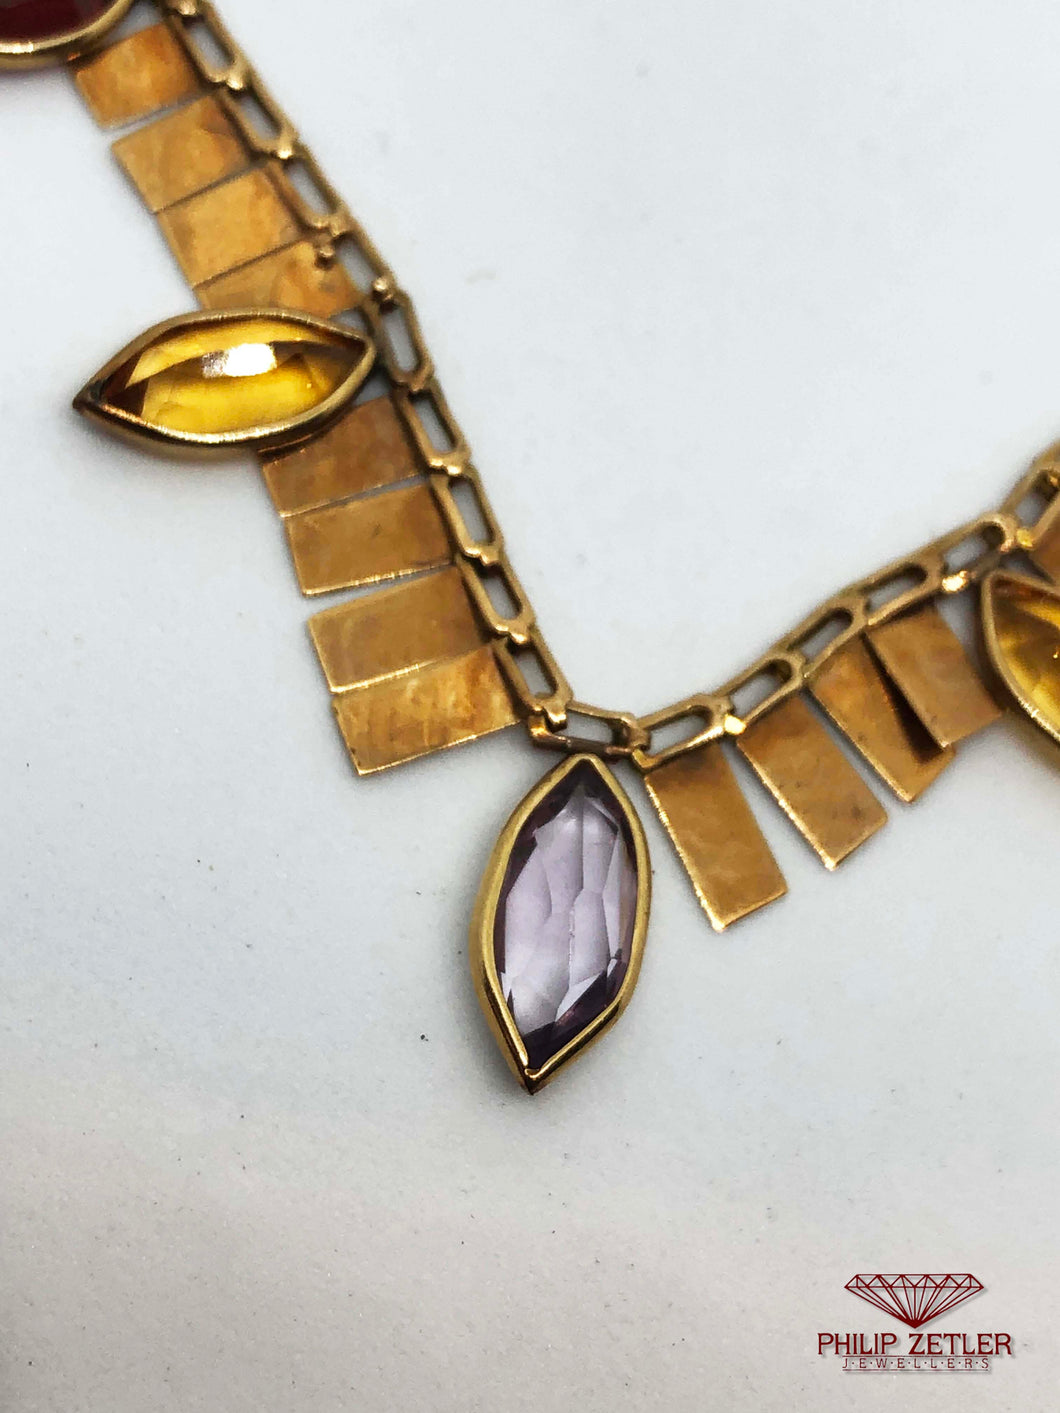 14 ct Pear Cut Amethyst, Citrine, Garnet and Gold Necklace